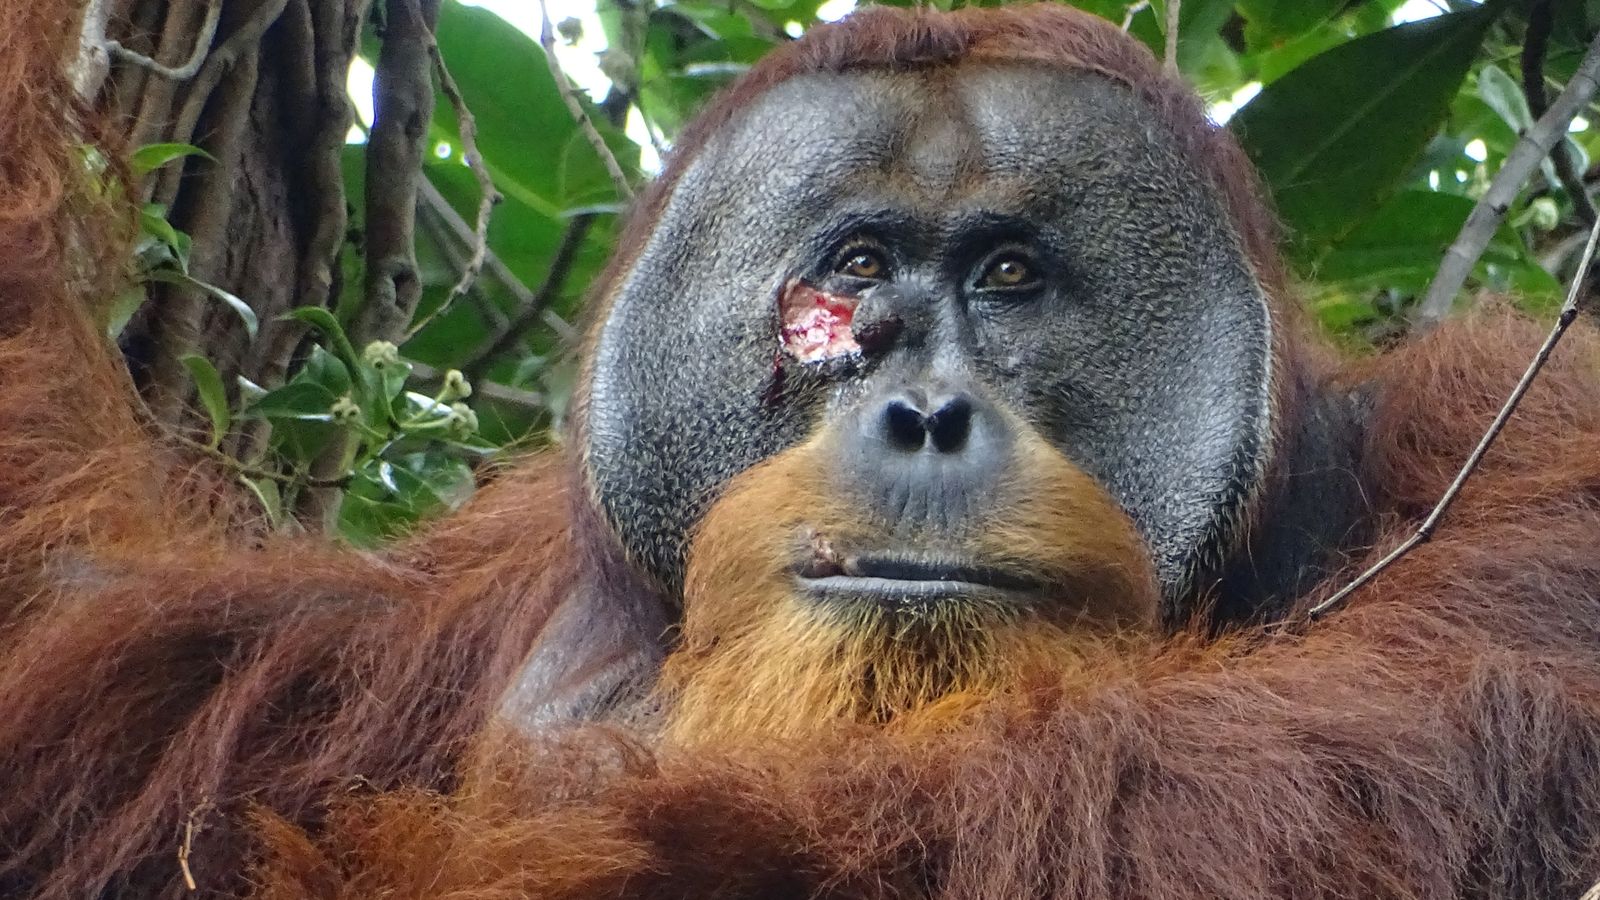 Orangutan seen utilizing medicinal plant to deal with wound in first for wild animals